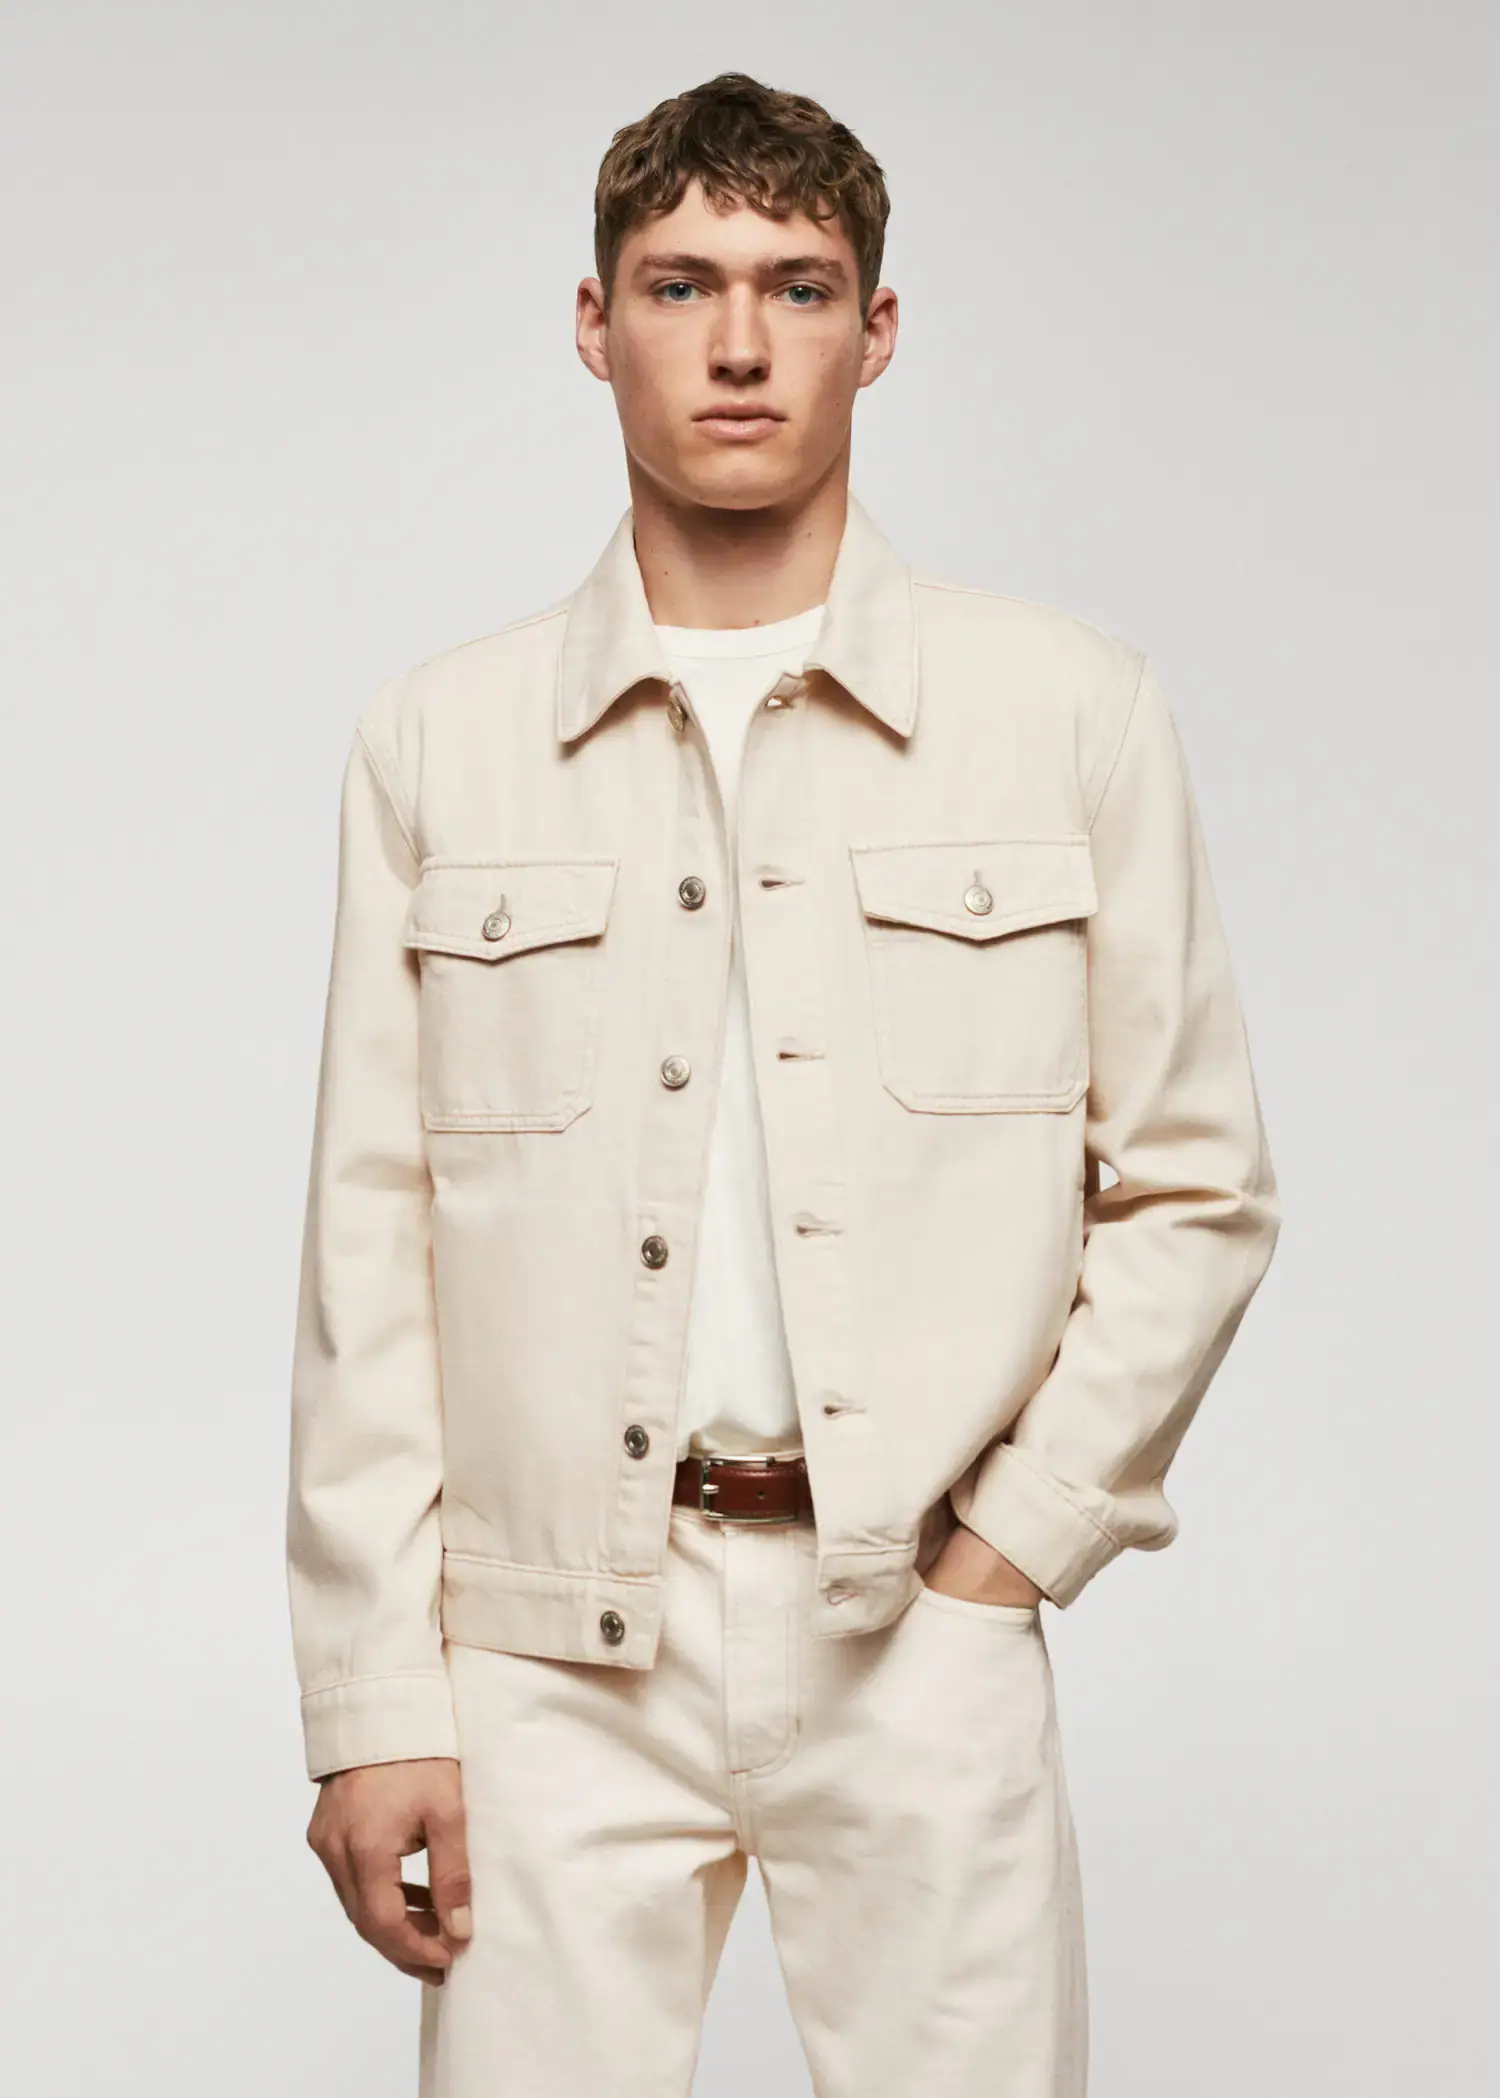 Mango Pocketed denim jacket. a man in a white shirt and jacket. 